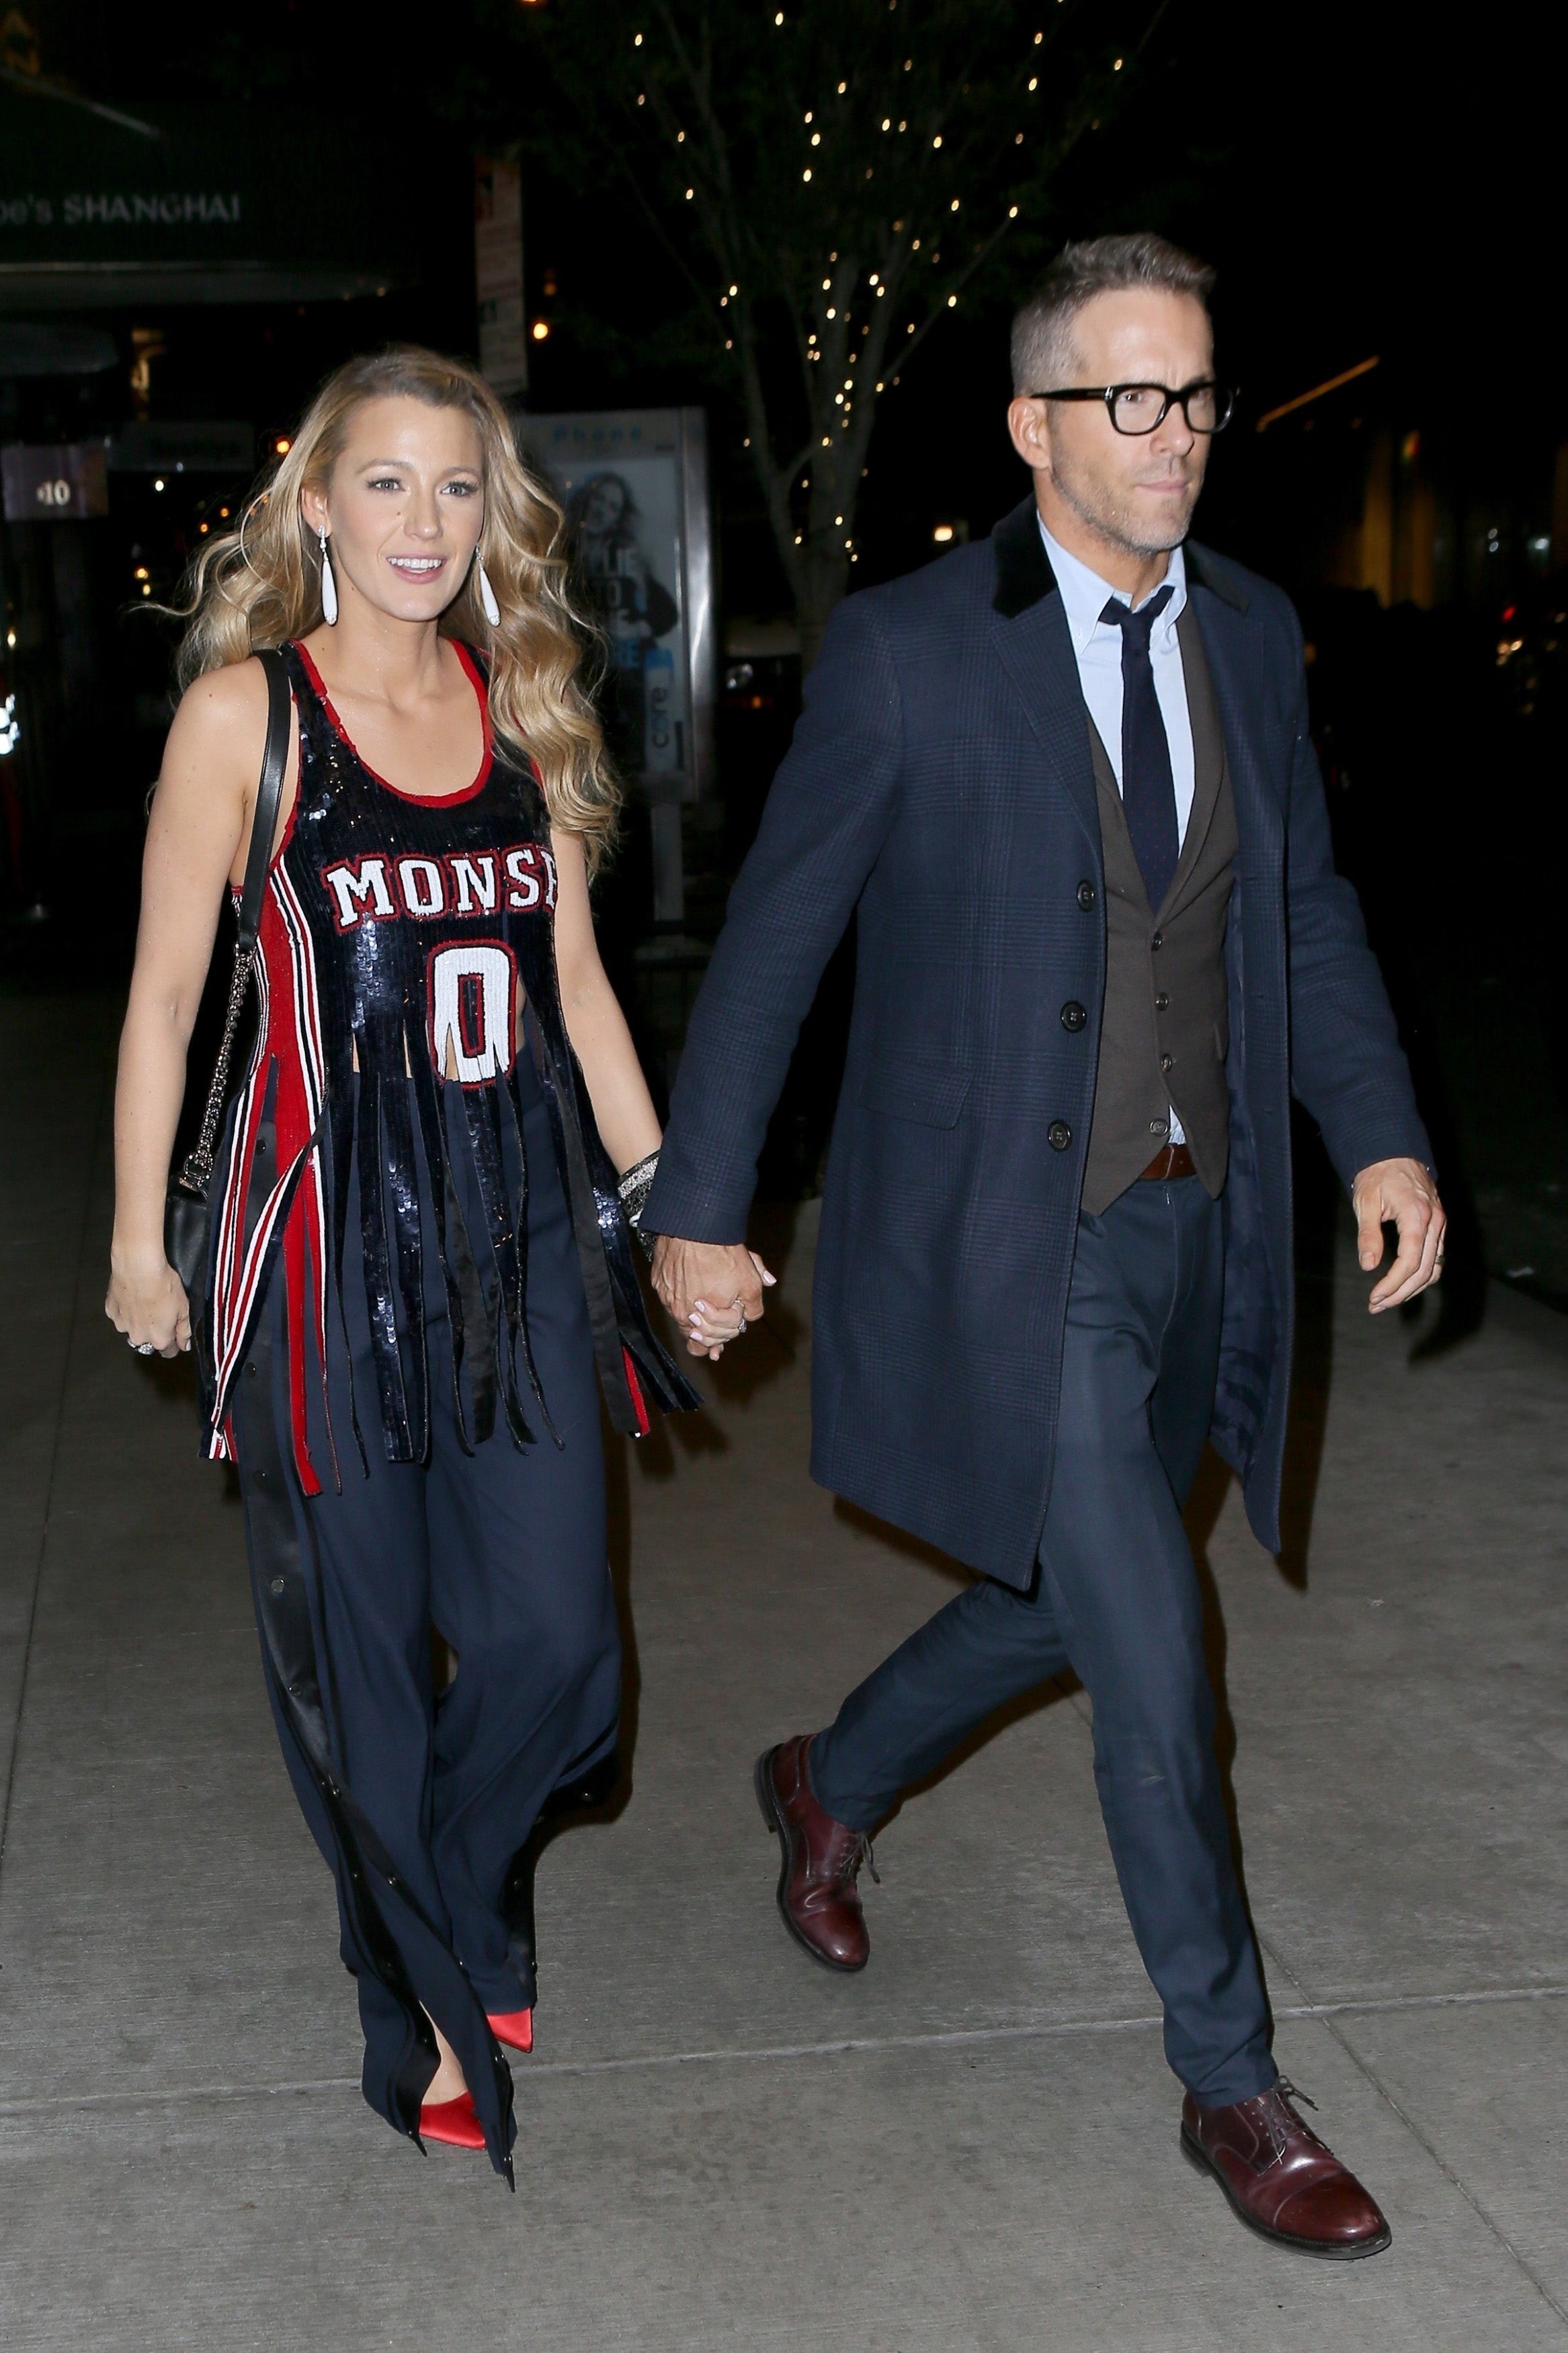 Blake Lively Stuns in Bedazzled Jersey, Holds Hands With Ryan Reynolds: Pic ...